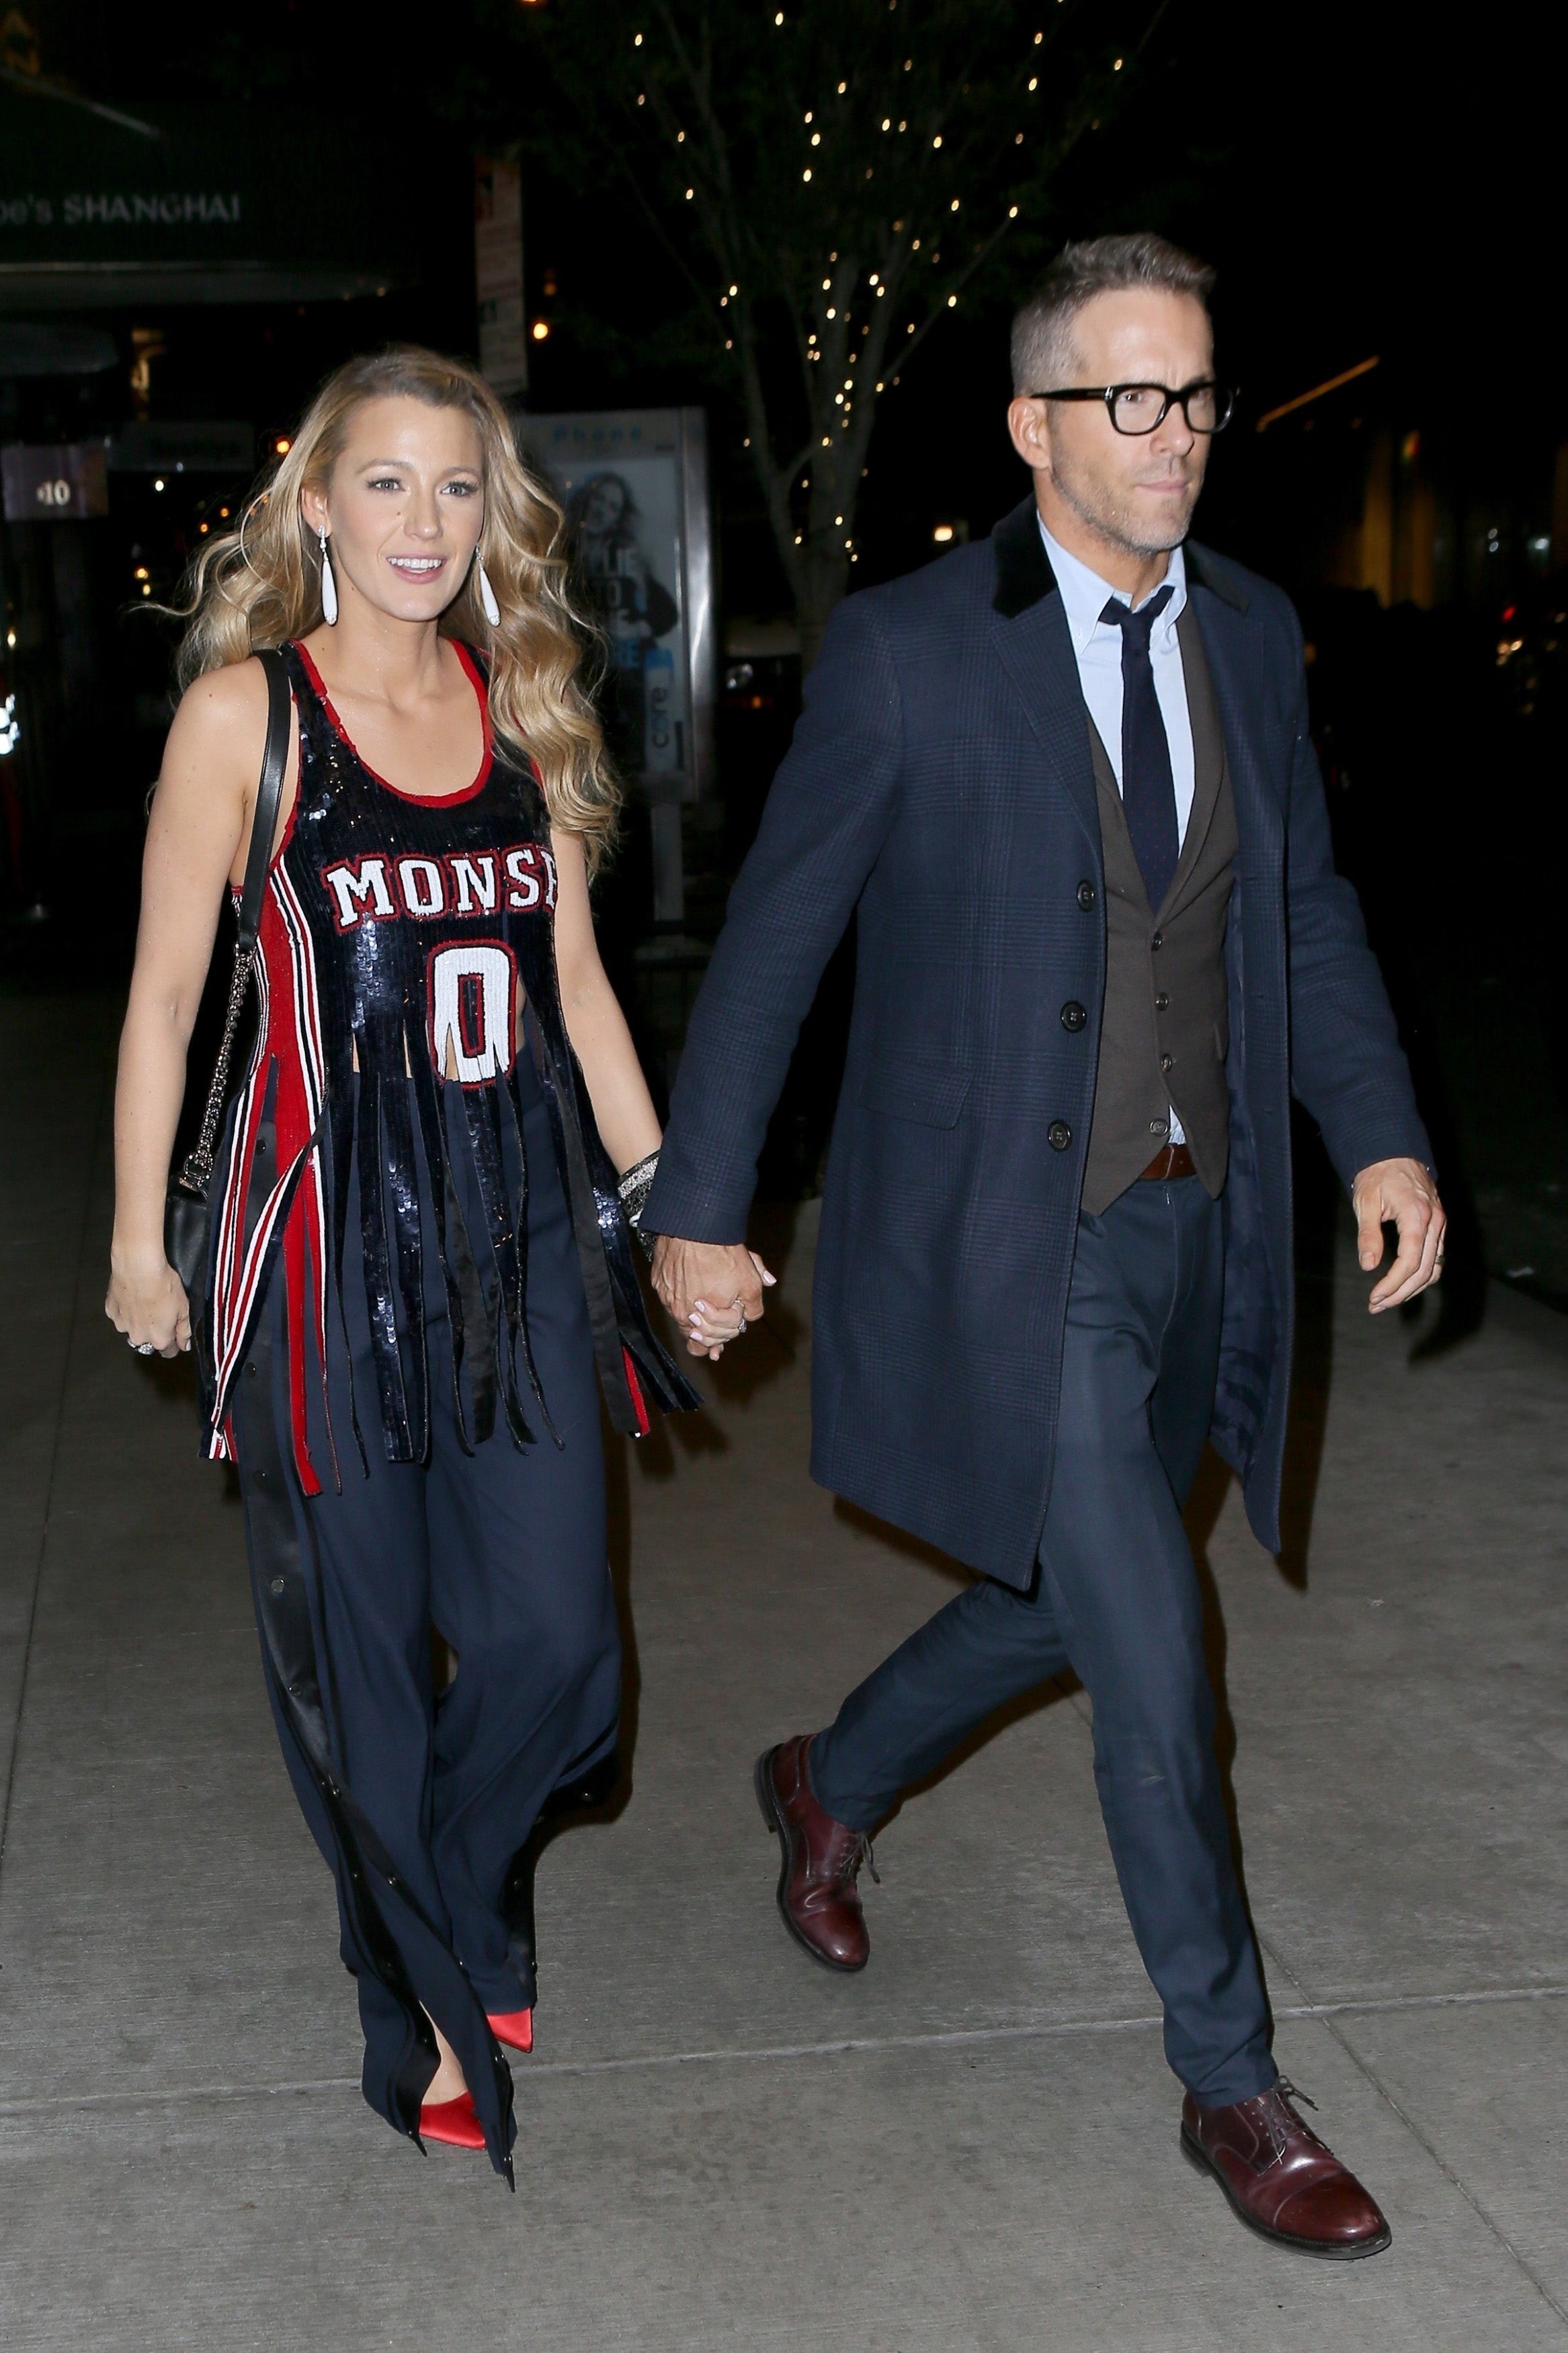 Blake Lively Stuns in Bedazzled Jersey, Holds Hands With Ryan Reynolds: Pic ...